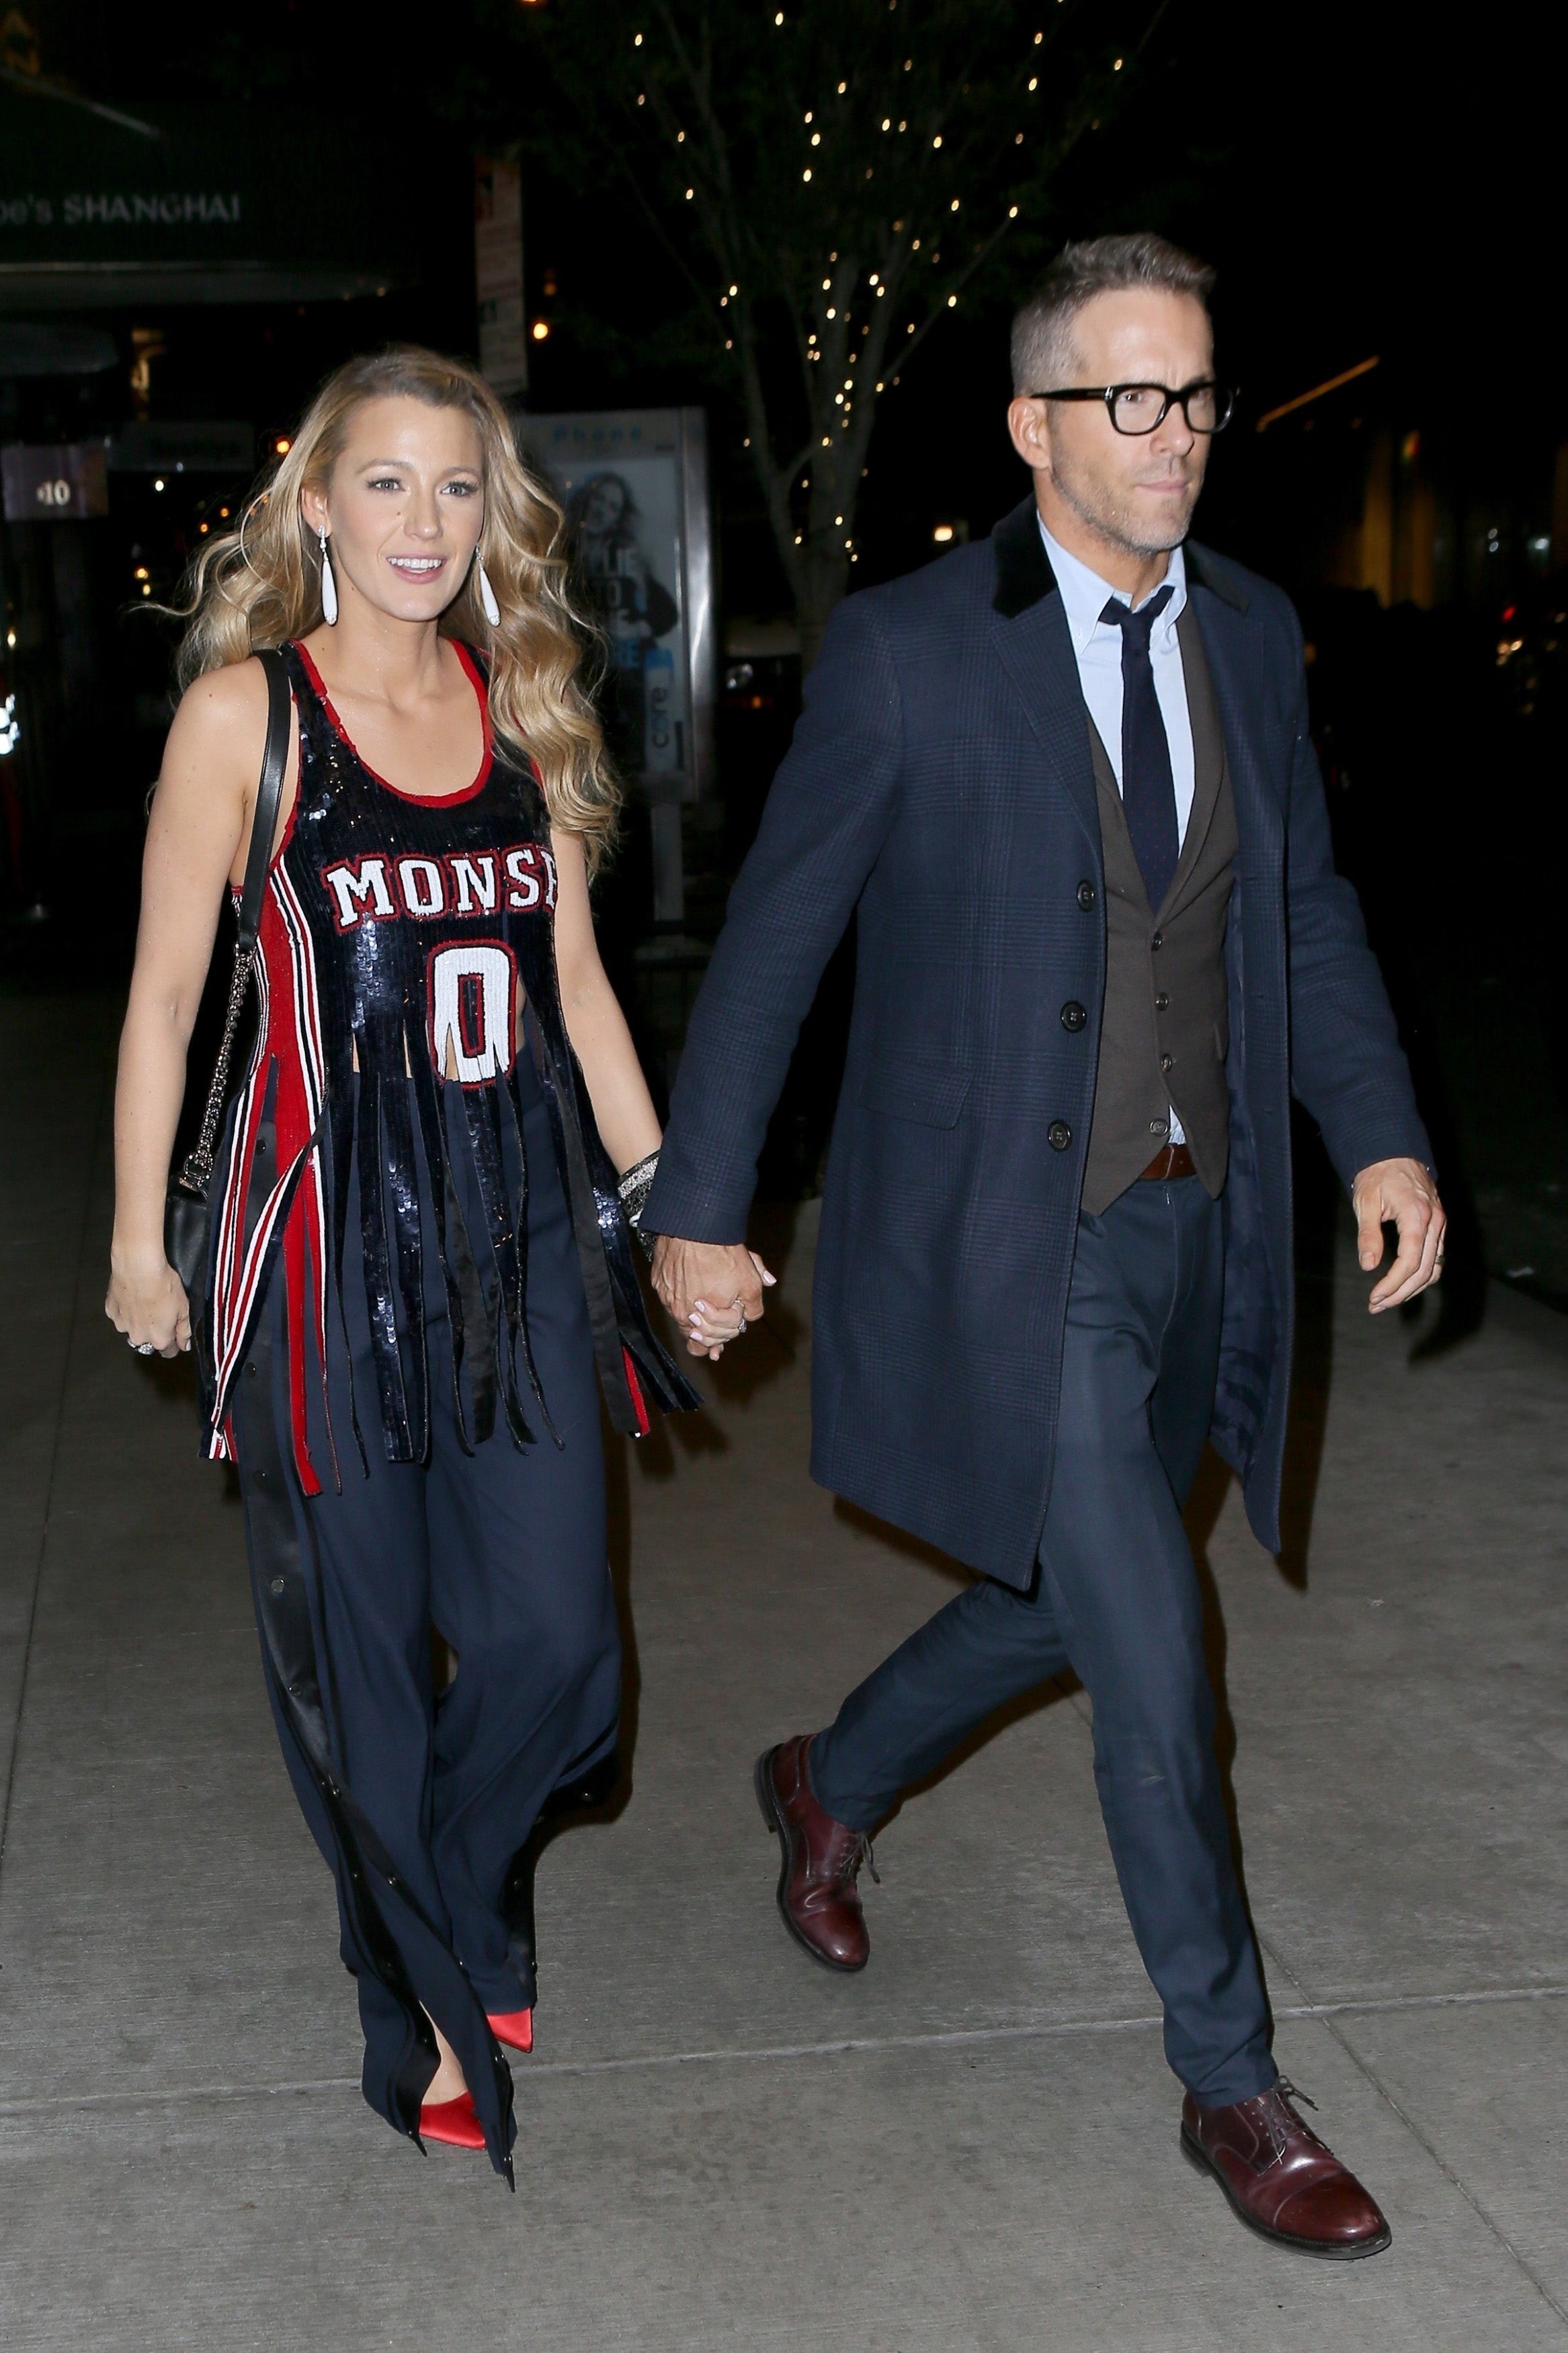 Blake Lively Stuns in Bedazzled Jersey, Holds Hands With Ryan Reynolds: Pic ...